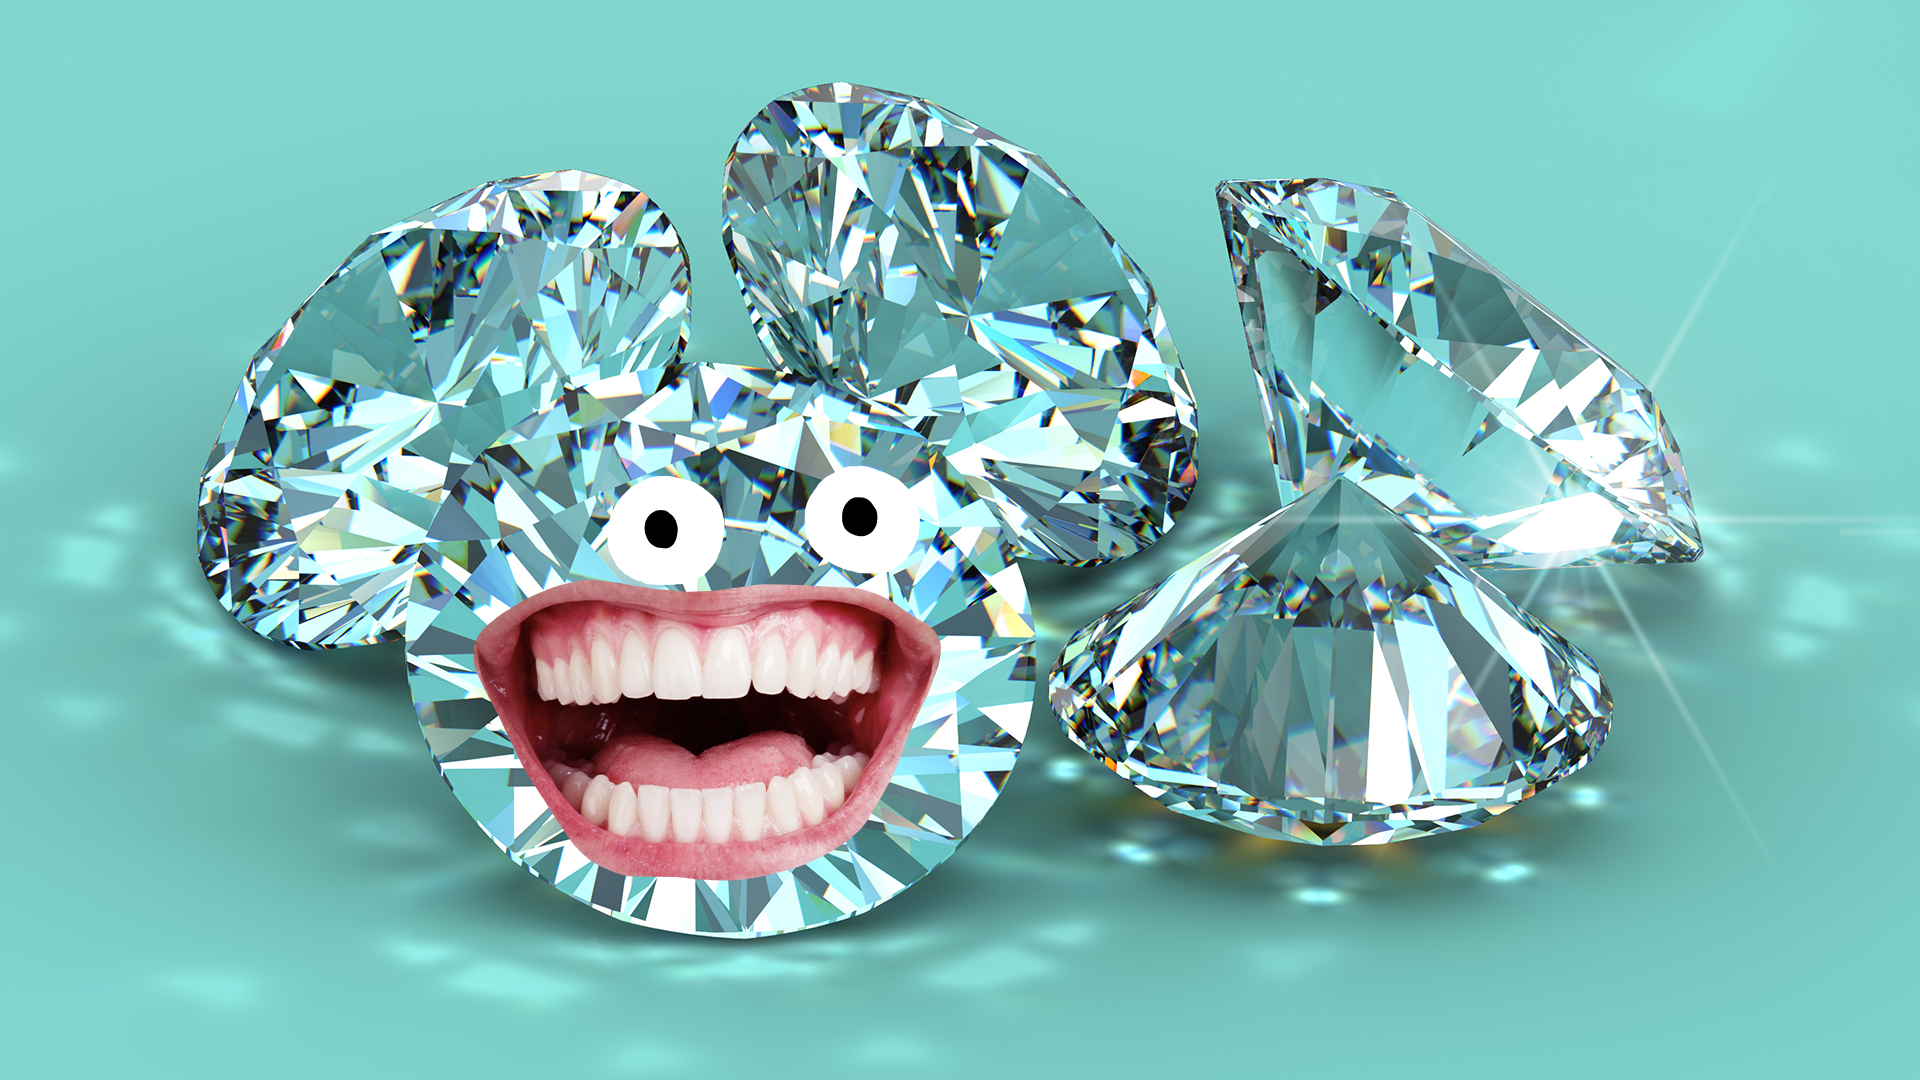 Pile of diamonds with smiley face